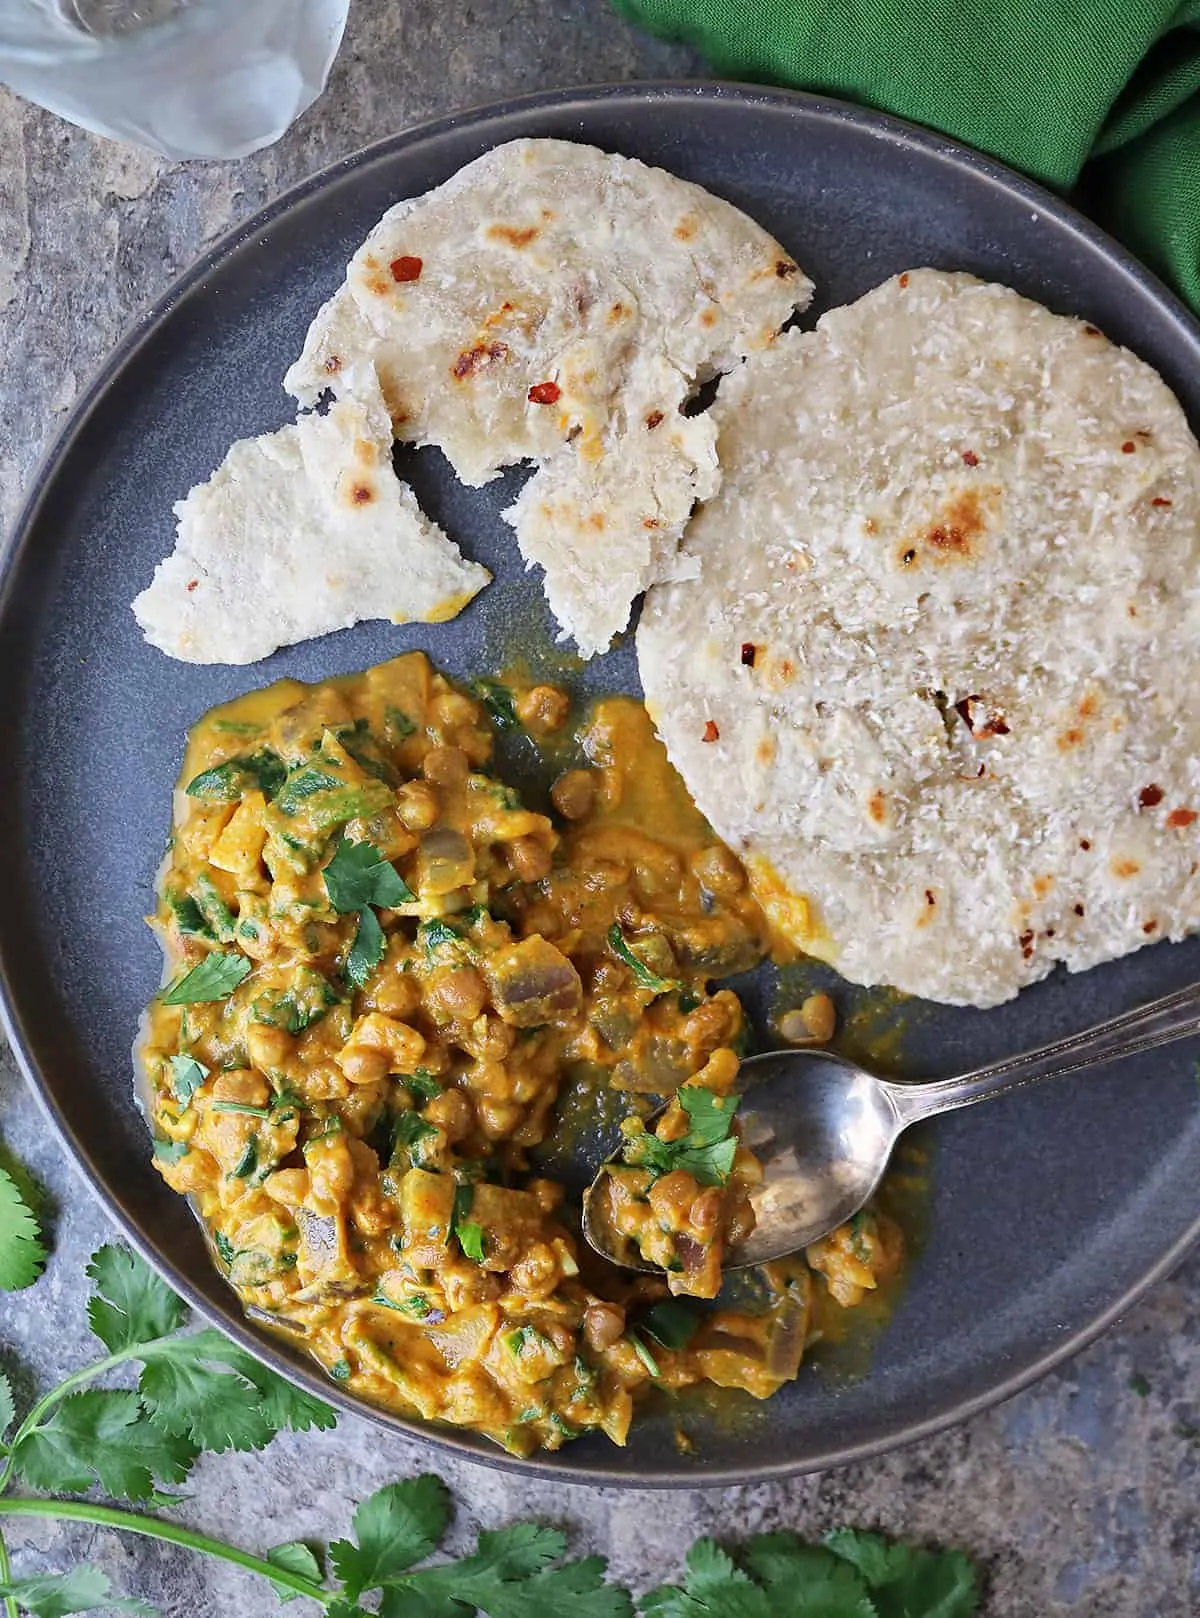 Quick, delicious and filling, this vegan lentil curry had us licking our plates.